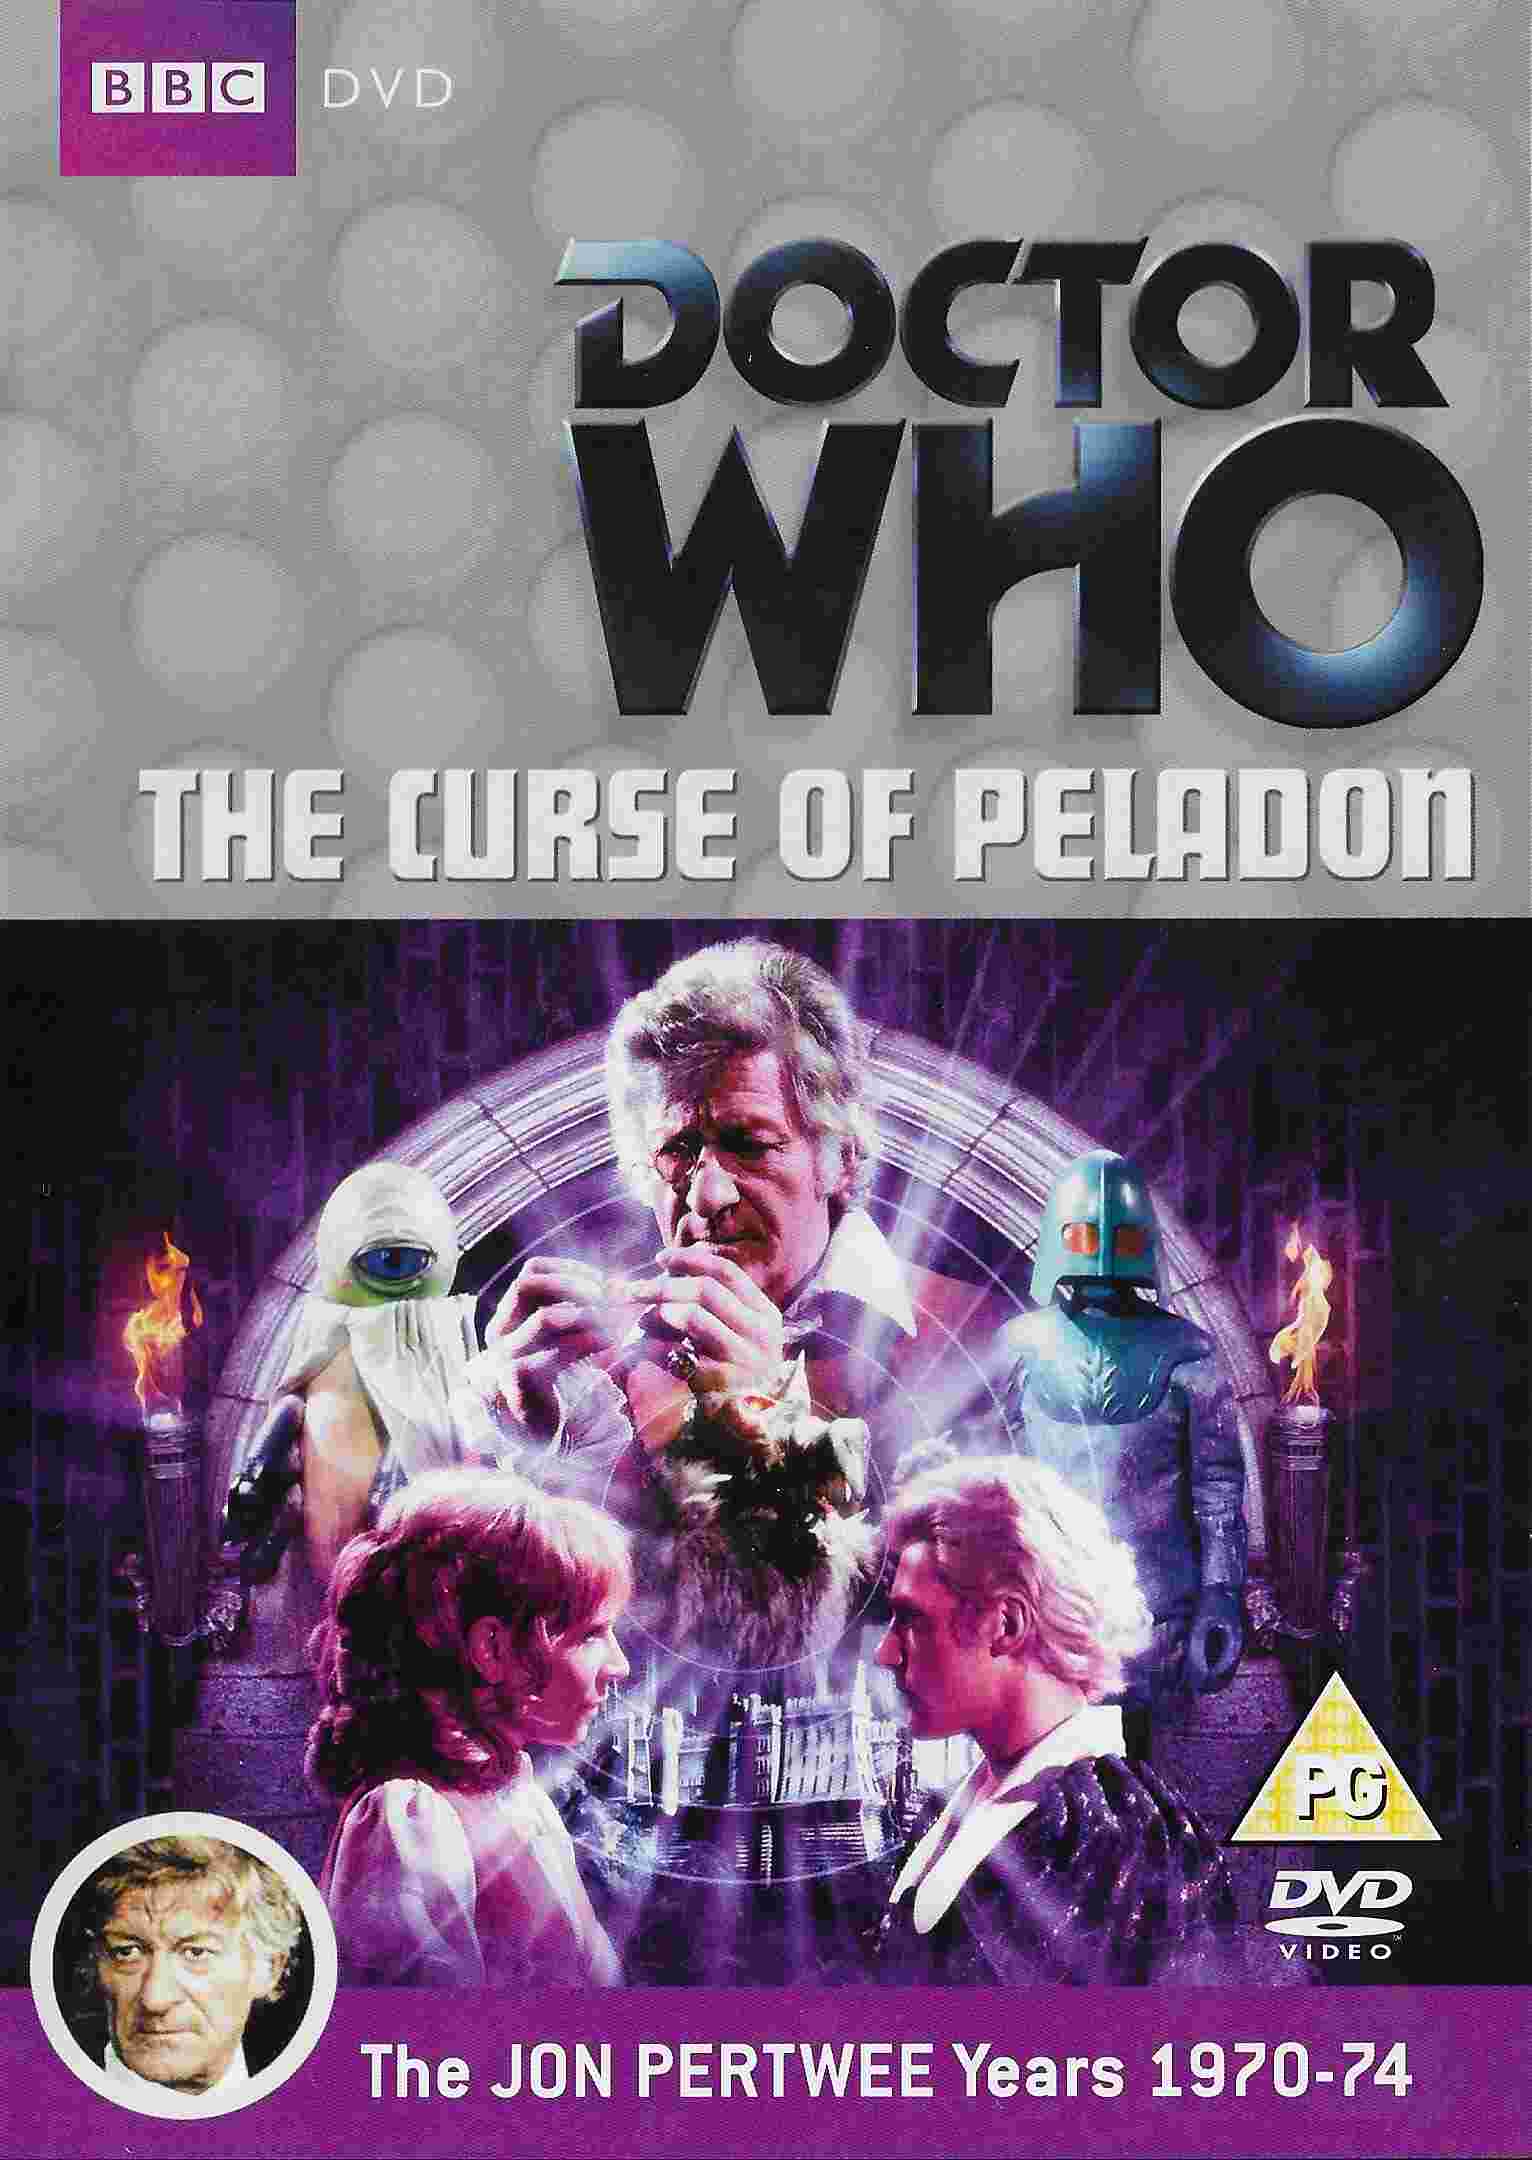 Picture of BBCDVD 2744A Doctor Who - The Curse of Peladon by artist Robert Holmes from the BBC dvds - Records and Tapes library